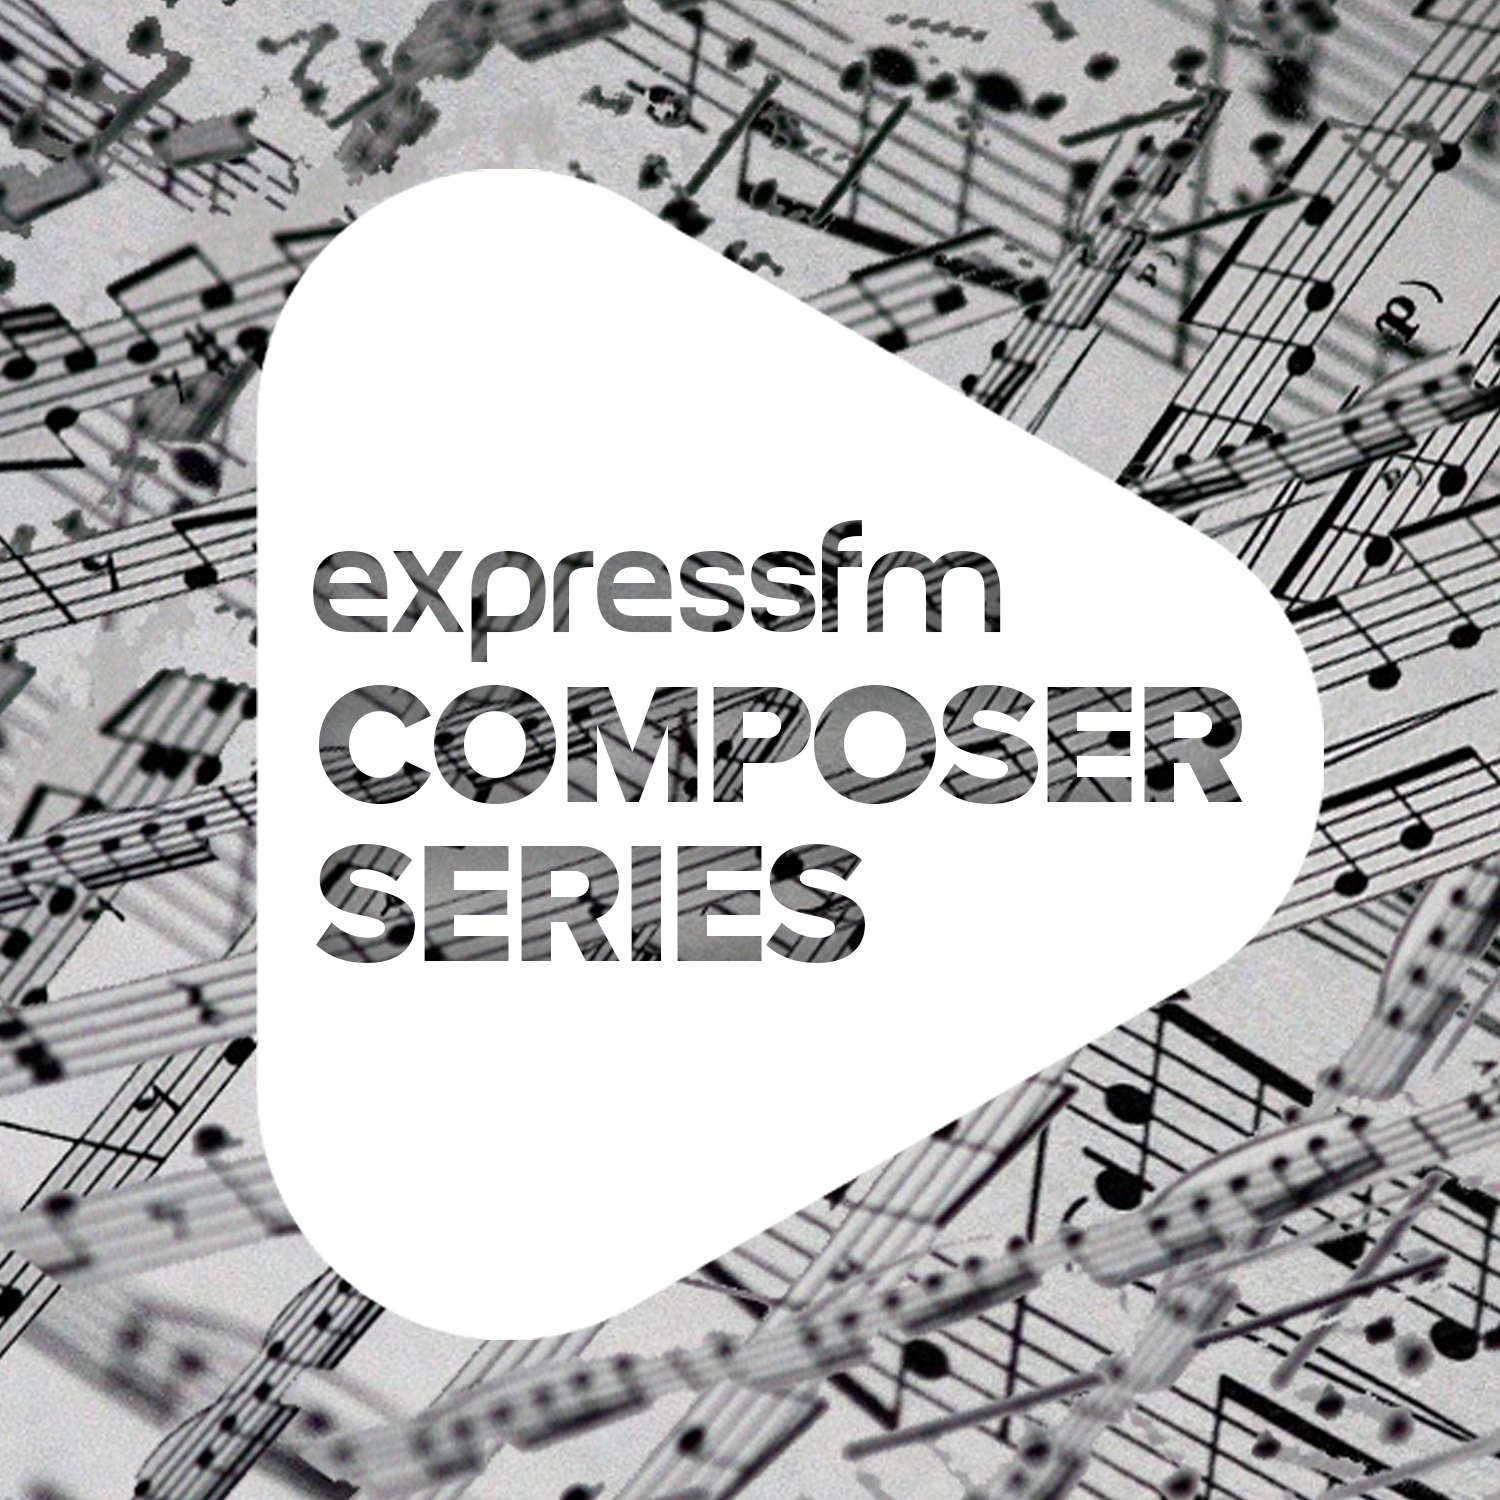 The Composer Series